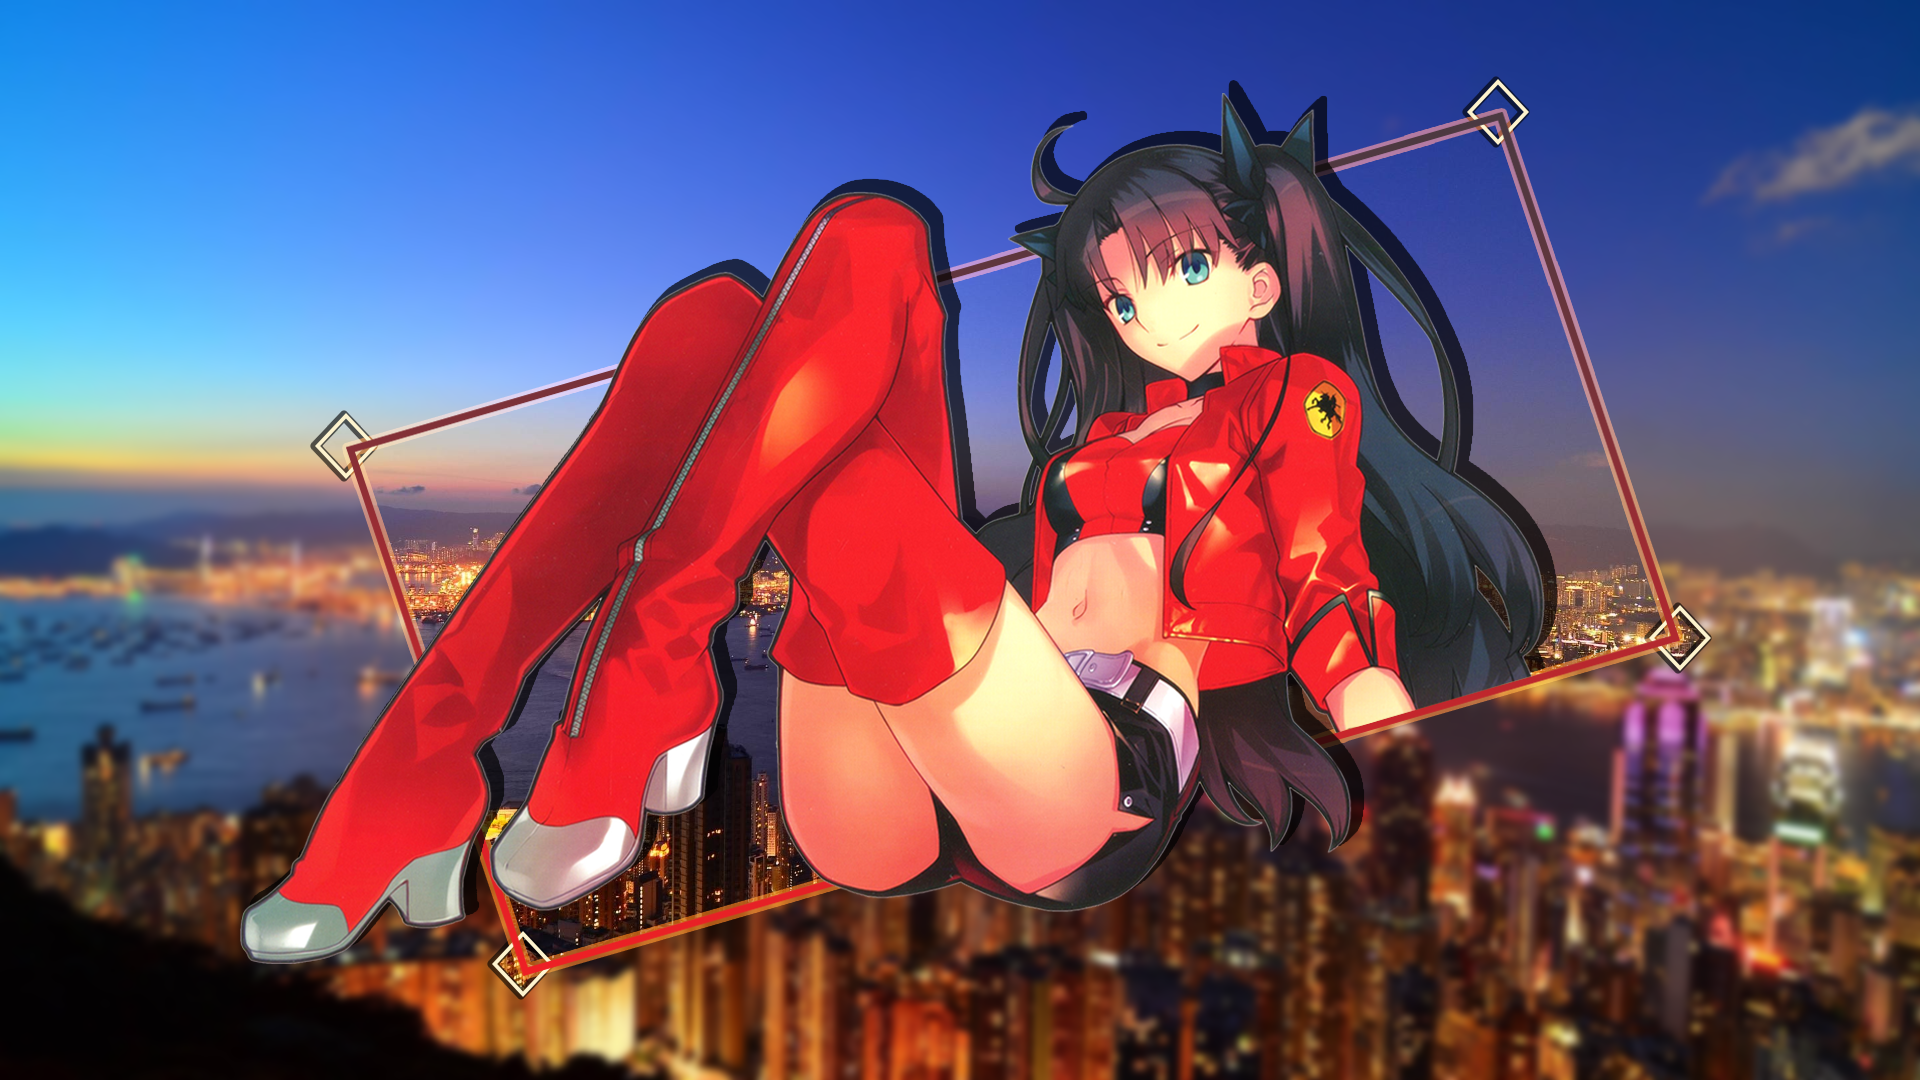 Tohsaka Rin Fate Series Hong Kong Picture In Picture Anime Girls 1920x1080